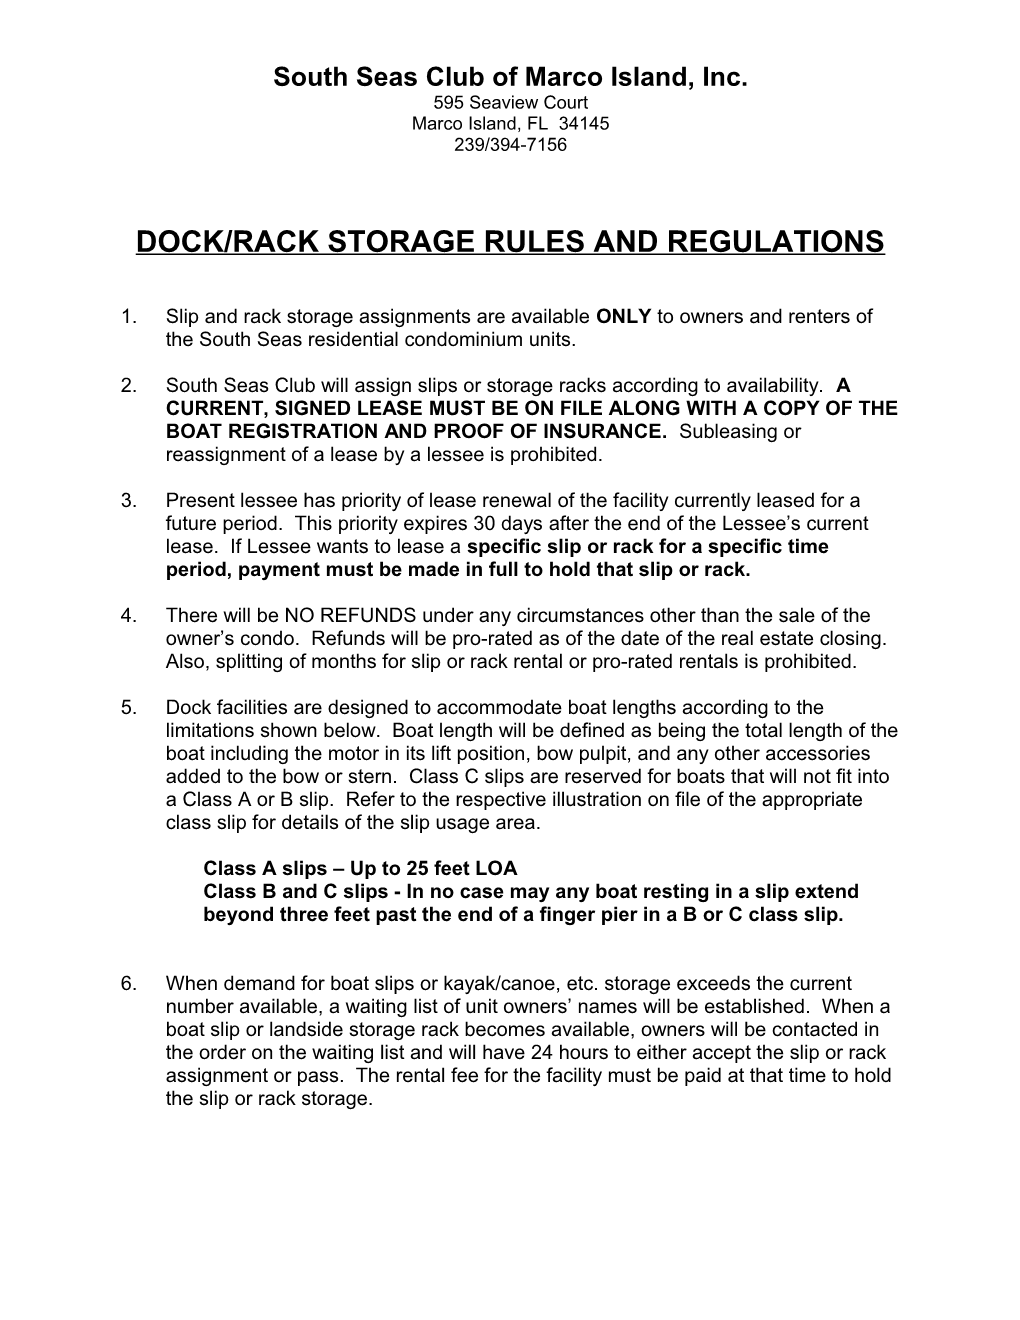 Dock/RACK STORAGE RULES and REGULATIONS